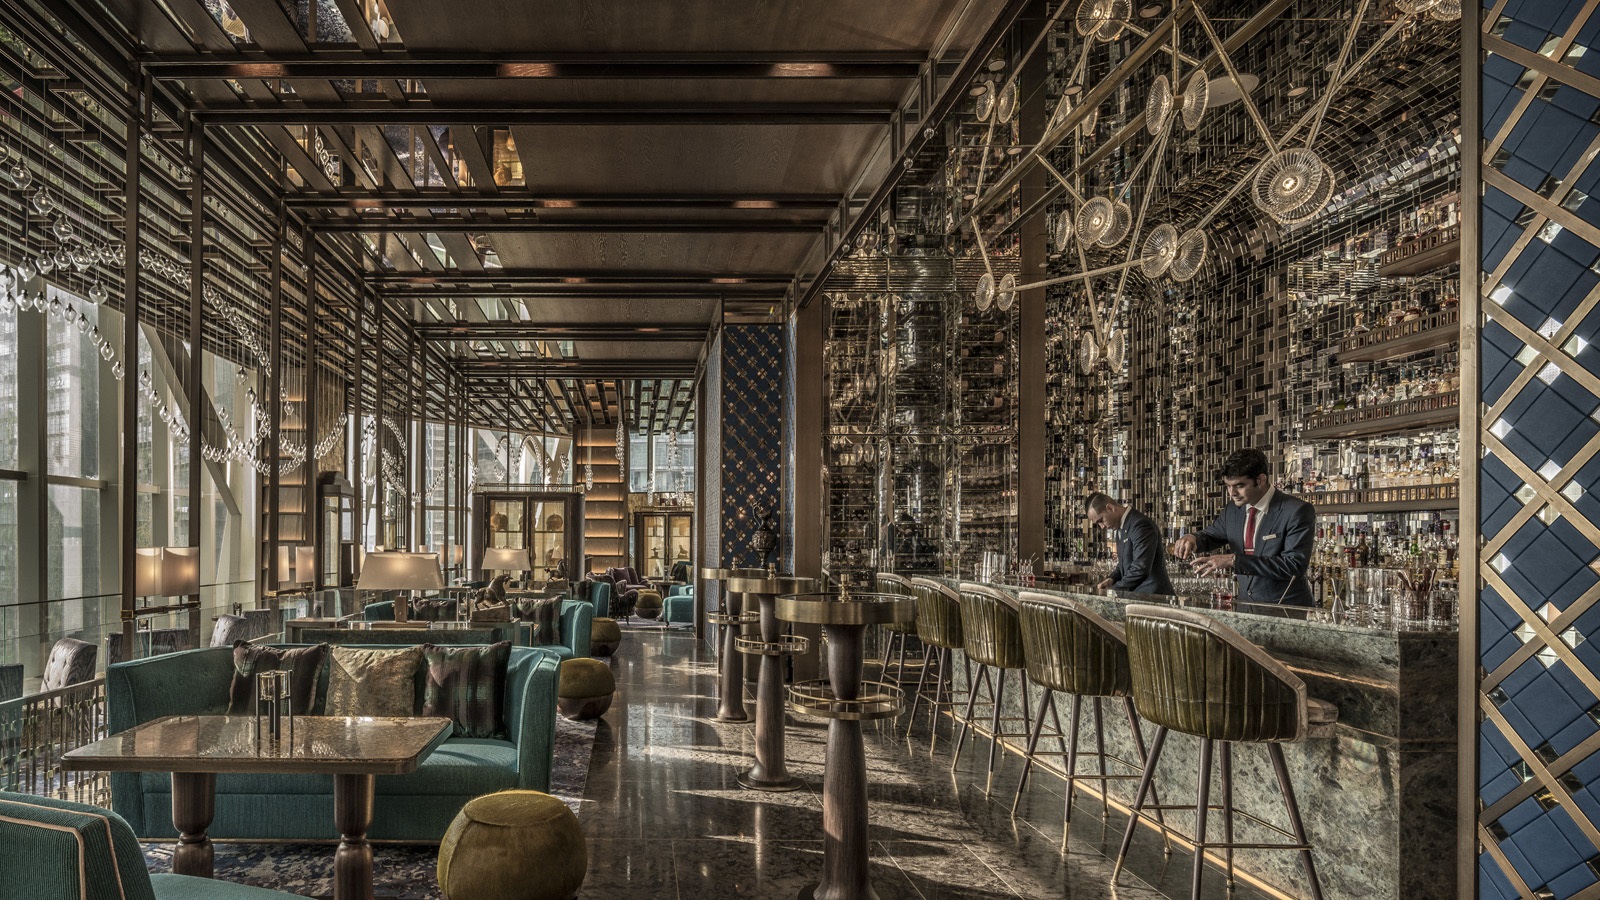 The beautifully designed Bar Trigona at Four Seasons Hotel Kuala Lumpur has won a coveted spot among Asia’s 50 Best Bars 2019, winning the Ketel One Sustainable Bar Award. The bar sources many of its ingredients directly from small, local farmers and the bartenders deploy a root-to-shoot approach, finding a use for every single part of the ingredient – right down to husks and shells. Click to enlarge.